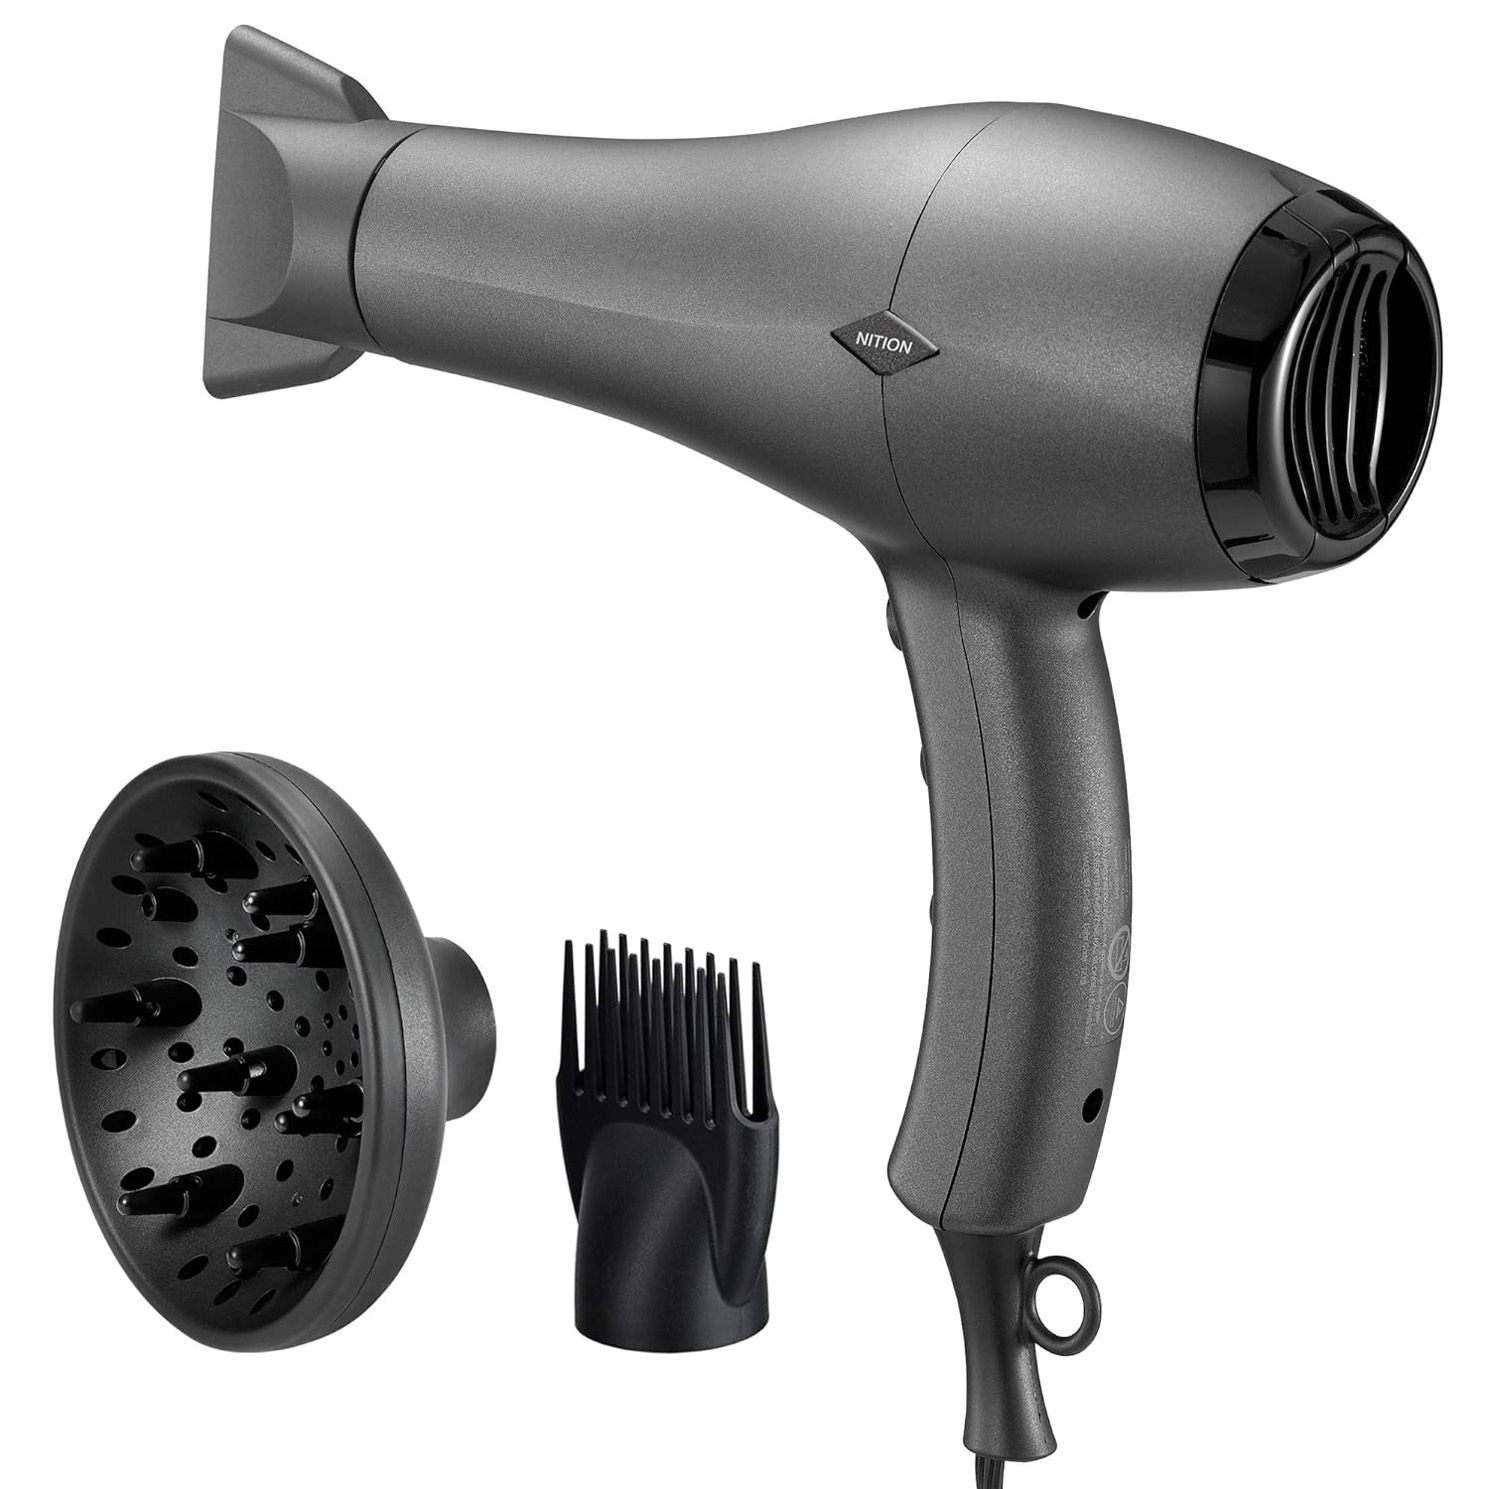 NITION Ceramic Hair Dryer with Diffuser,Comb & Nozzle Attachments